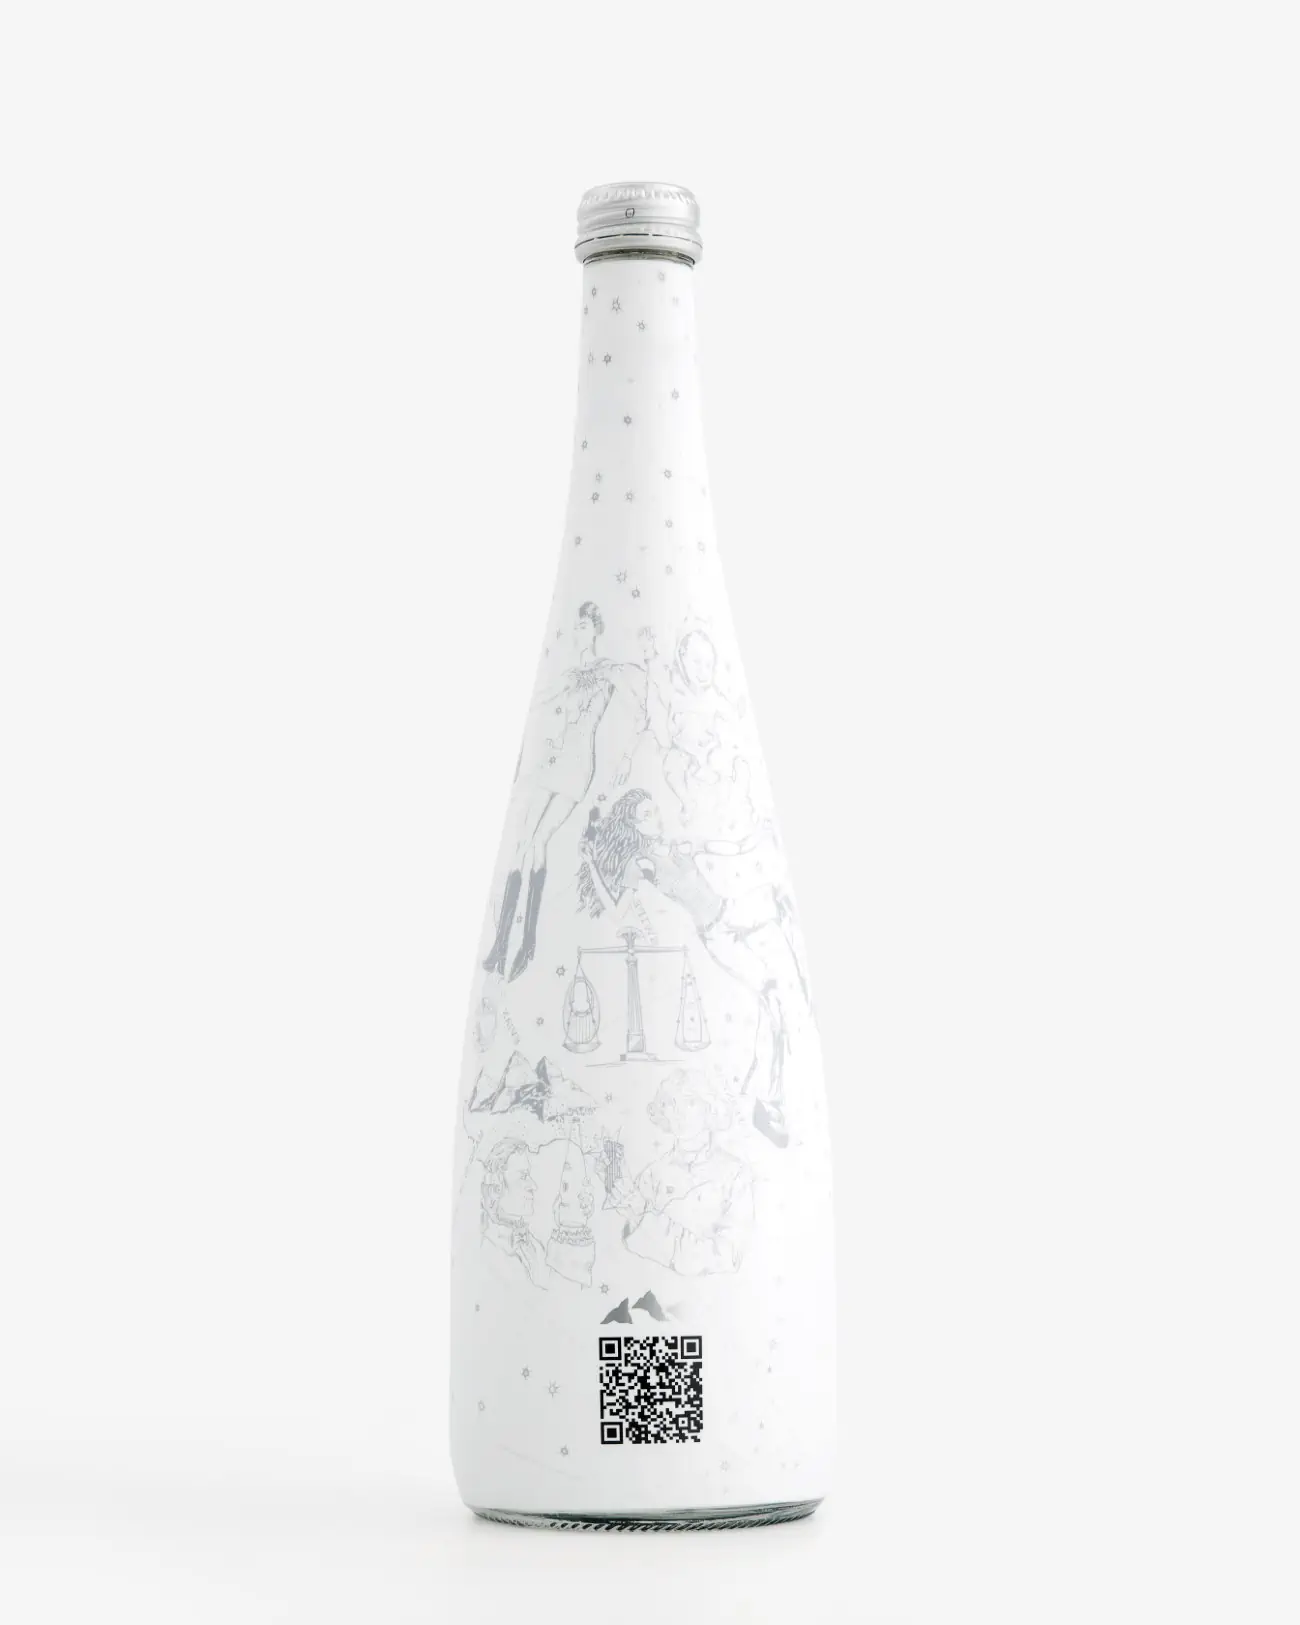 Evian partners with Coperni to create a limited-edition water bottle